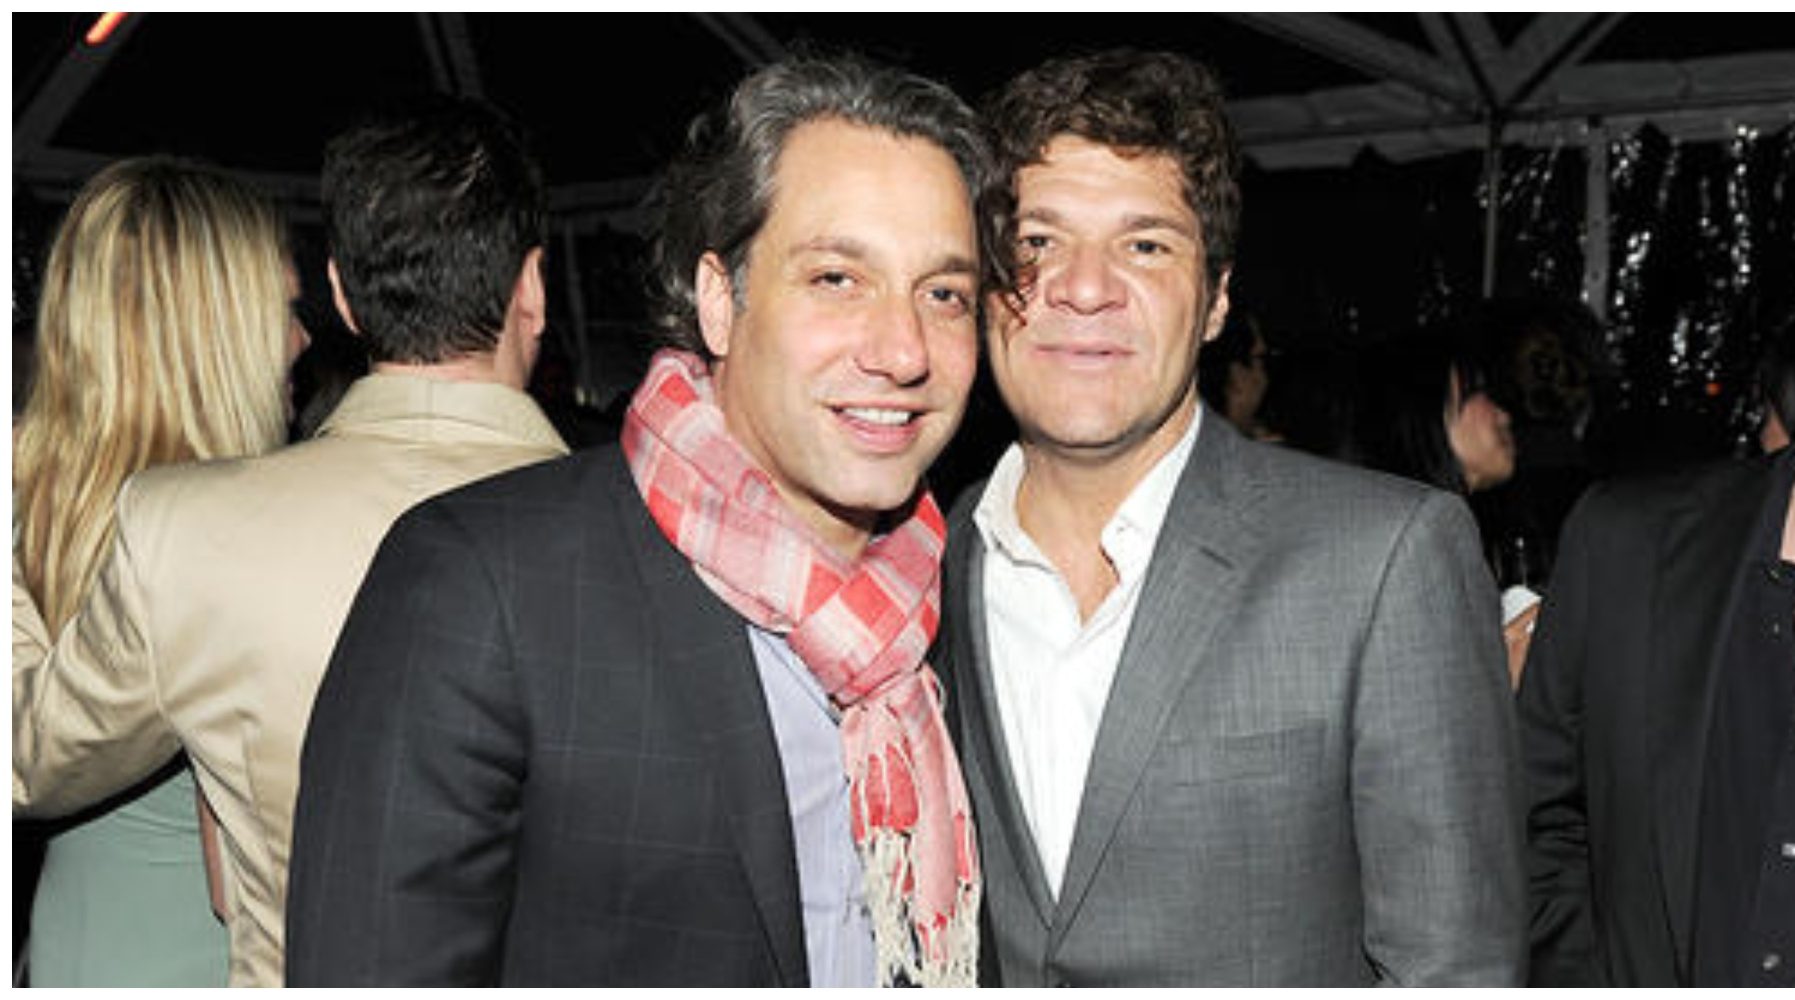 Thom Filicia and Greg Calejo together in an event (Credits: @gregcalejo)